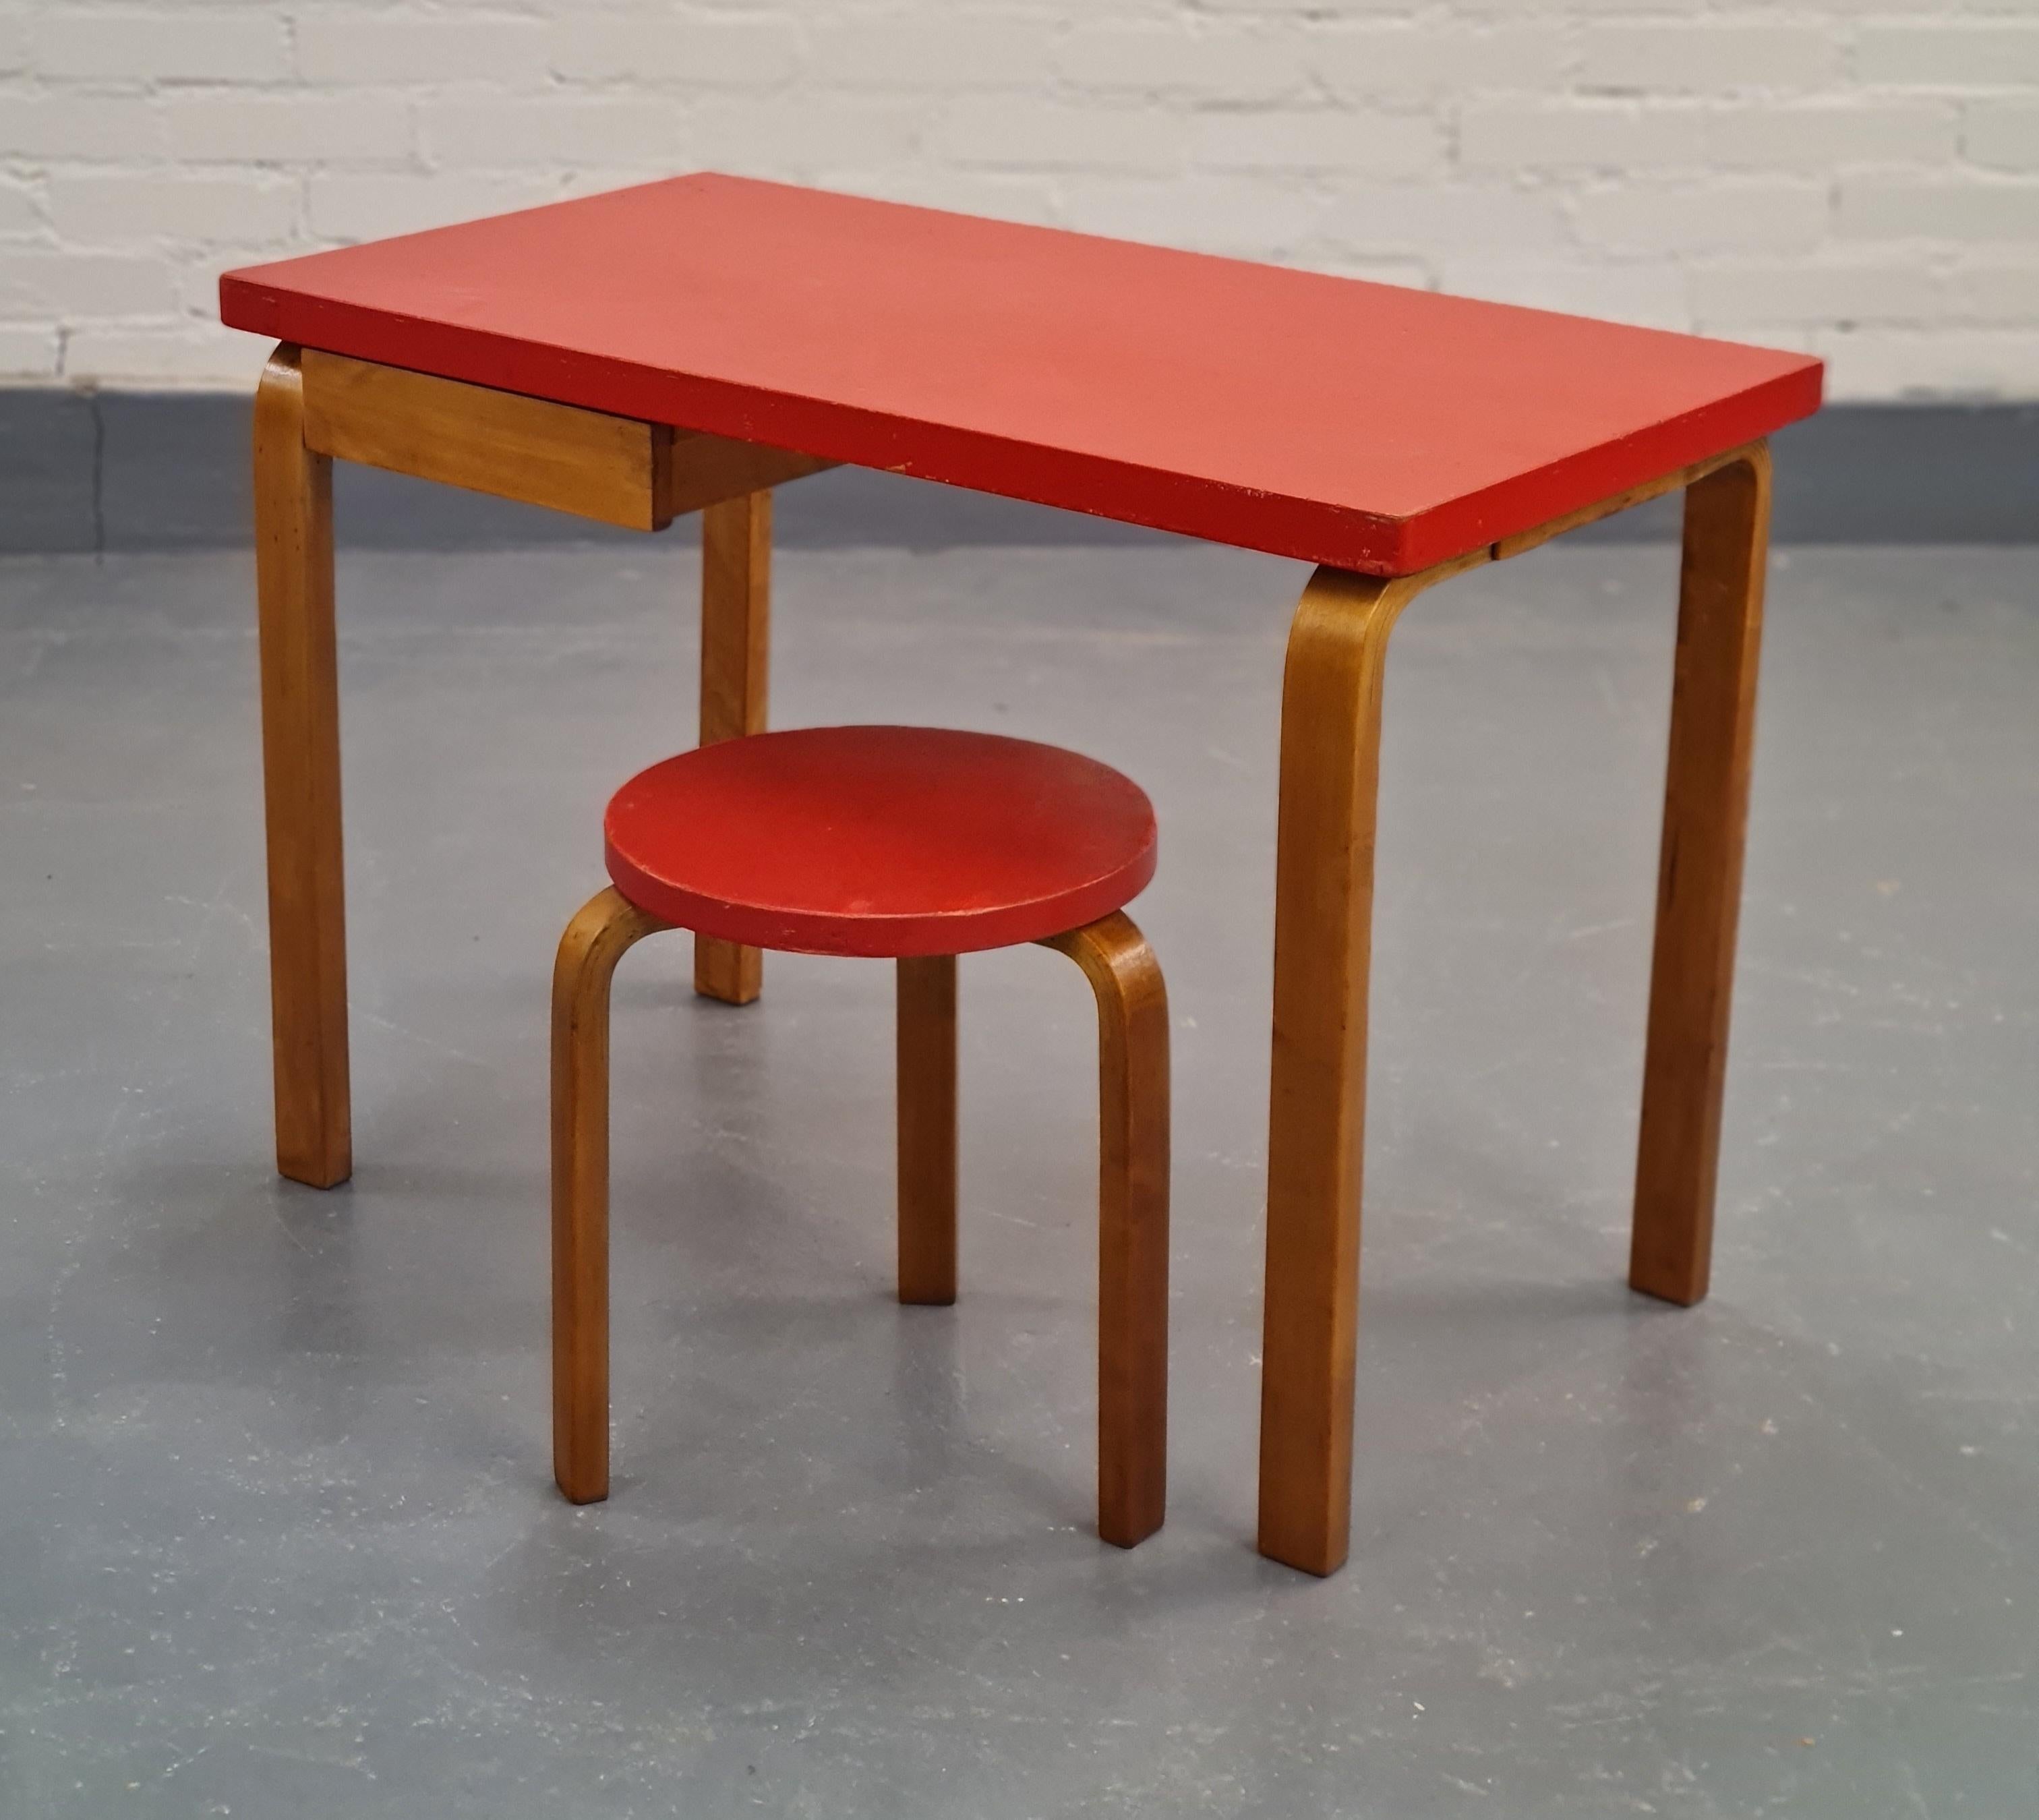 An iconic Aalto set including the model K81 writing table and the model 60 stool, both in a beautiful red coat of paint and an astonishing patina. Both pieces have maintained a great condition and the legs have developed a matching dark, coffee